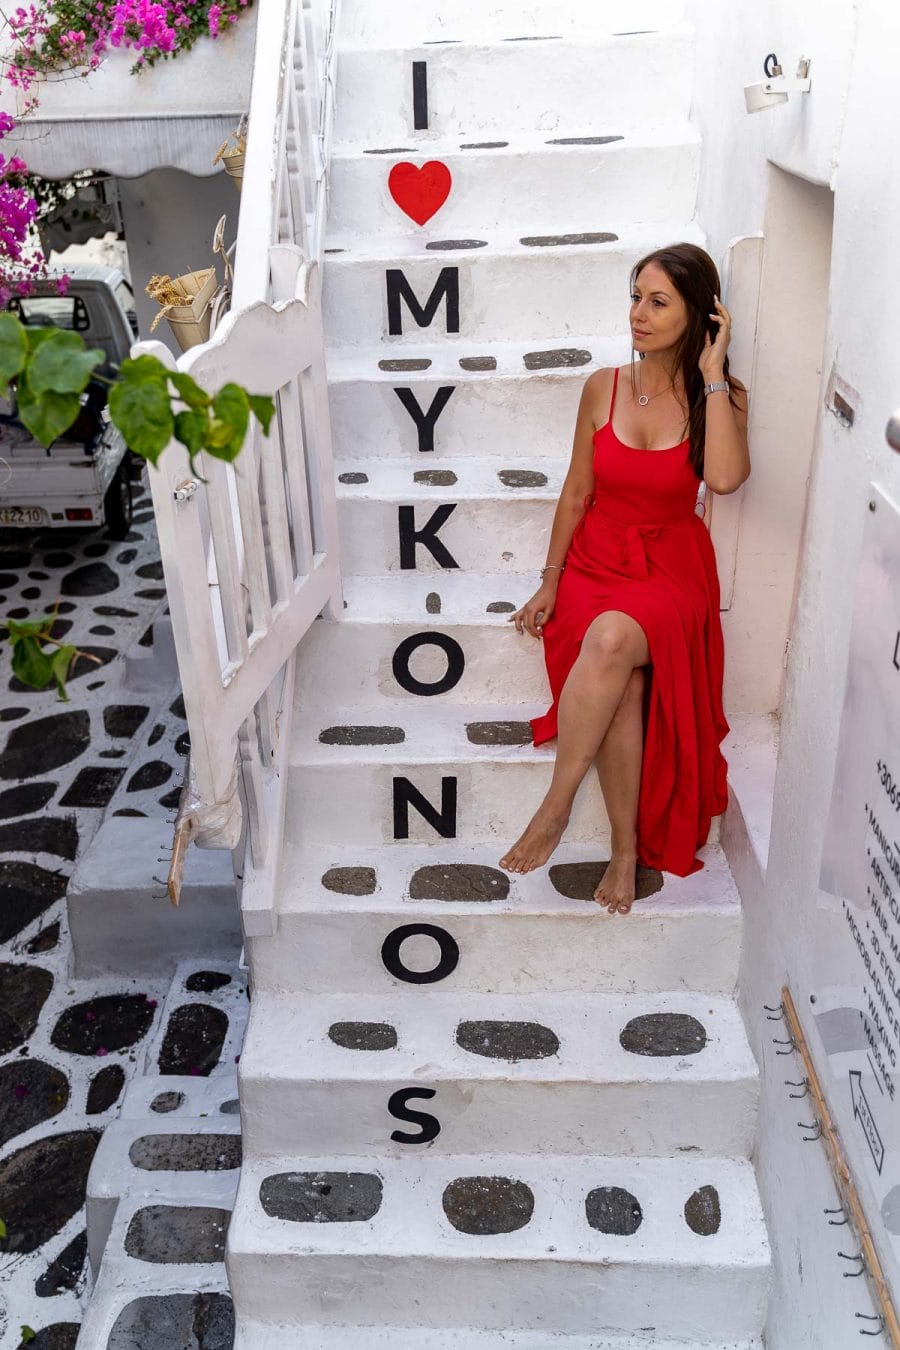 Girl in a red dress sitting on the I Love Mykonos stairway